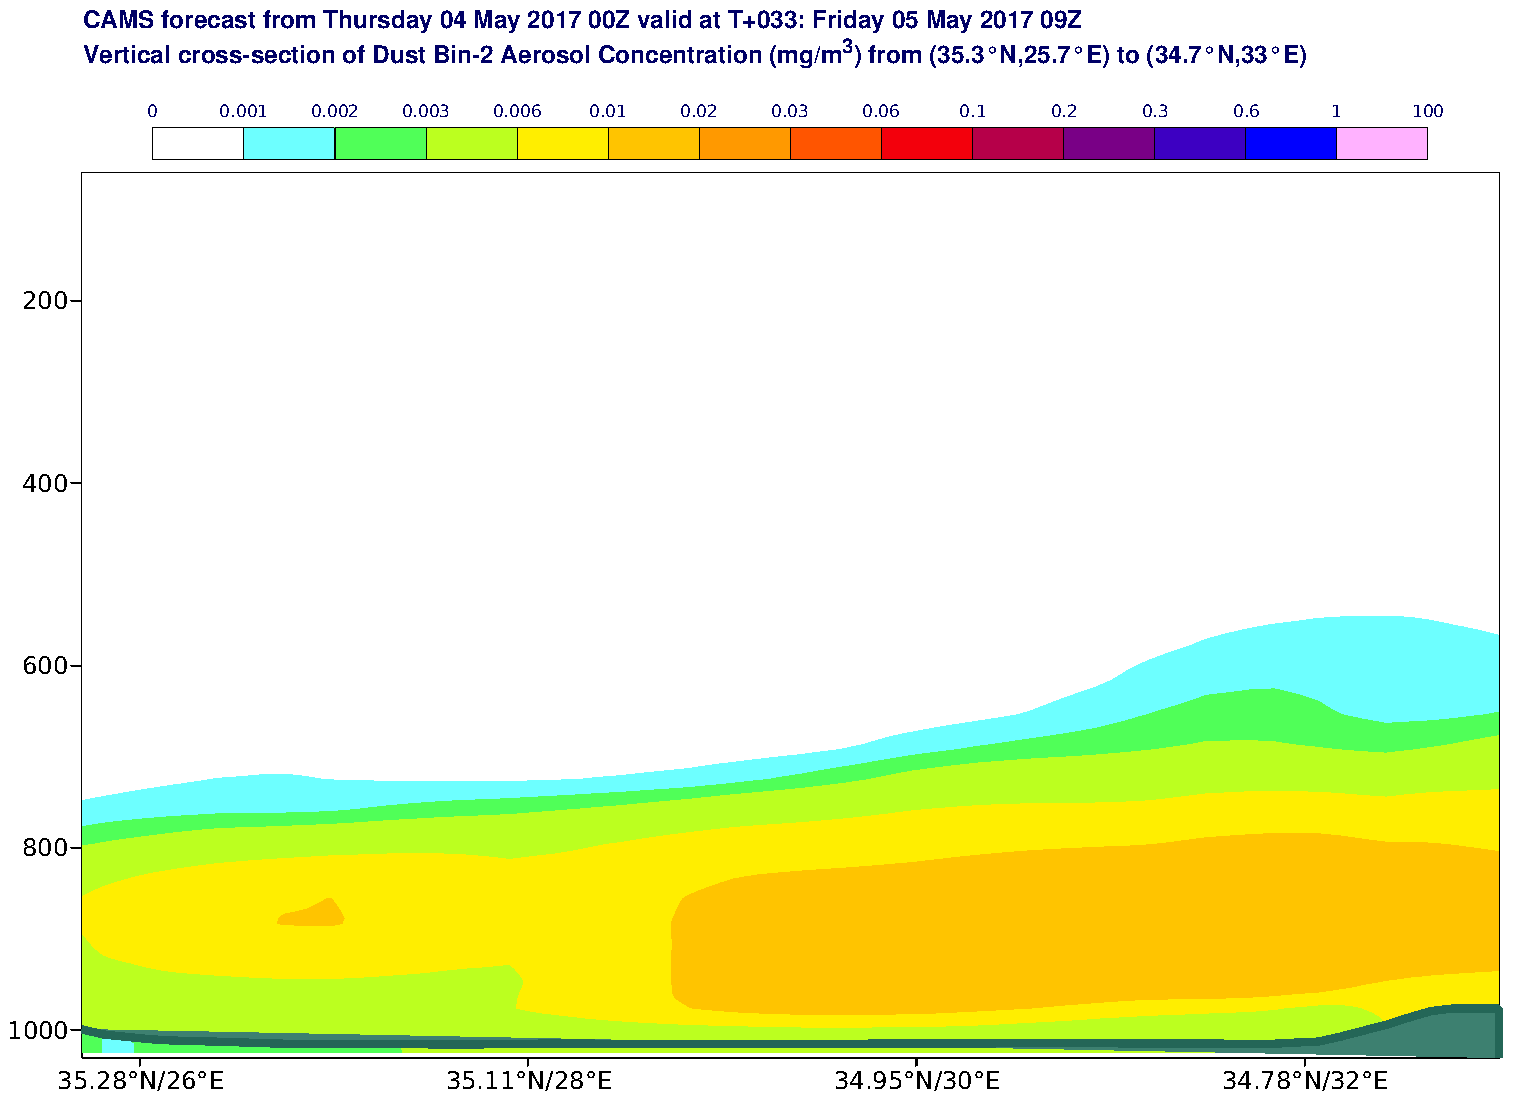 Vertical cross-section of Dust Bin-2 Aerosol Concentration (mg/m3) valid at T33 - 2017-05-05 09:00